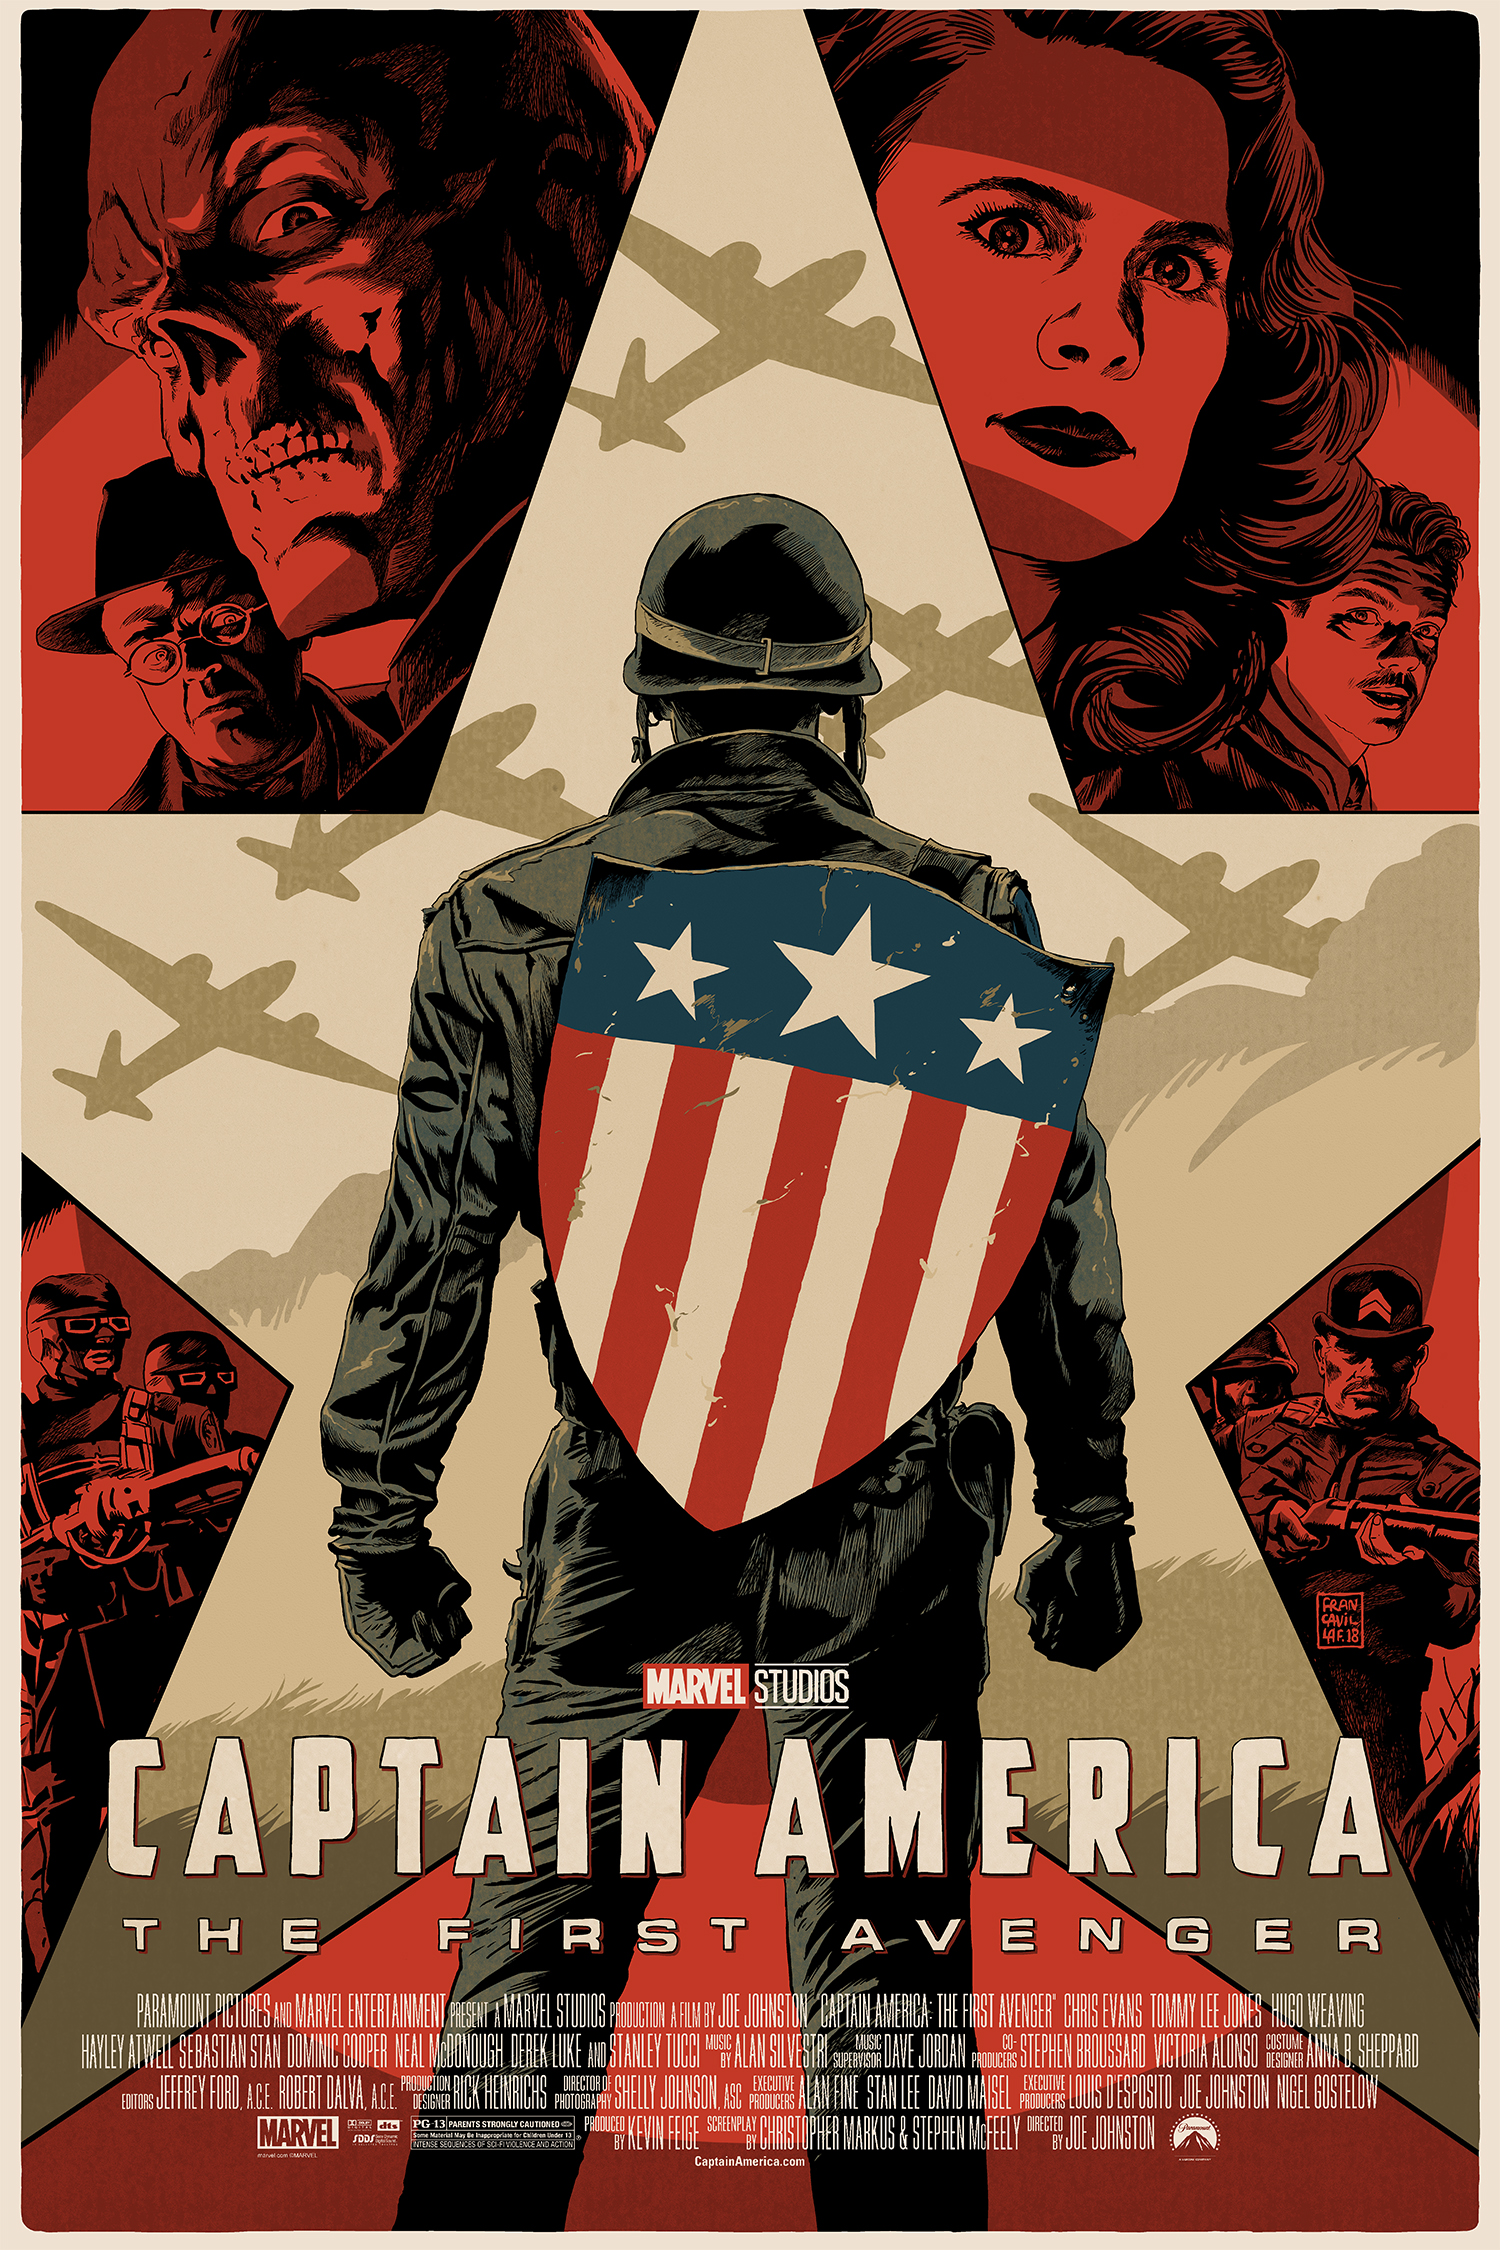 Captain America: The First Avenger by Francavilla